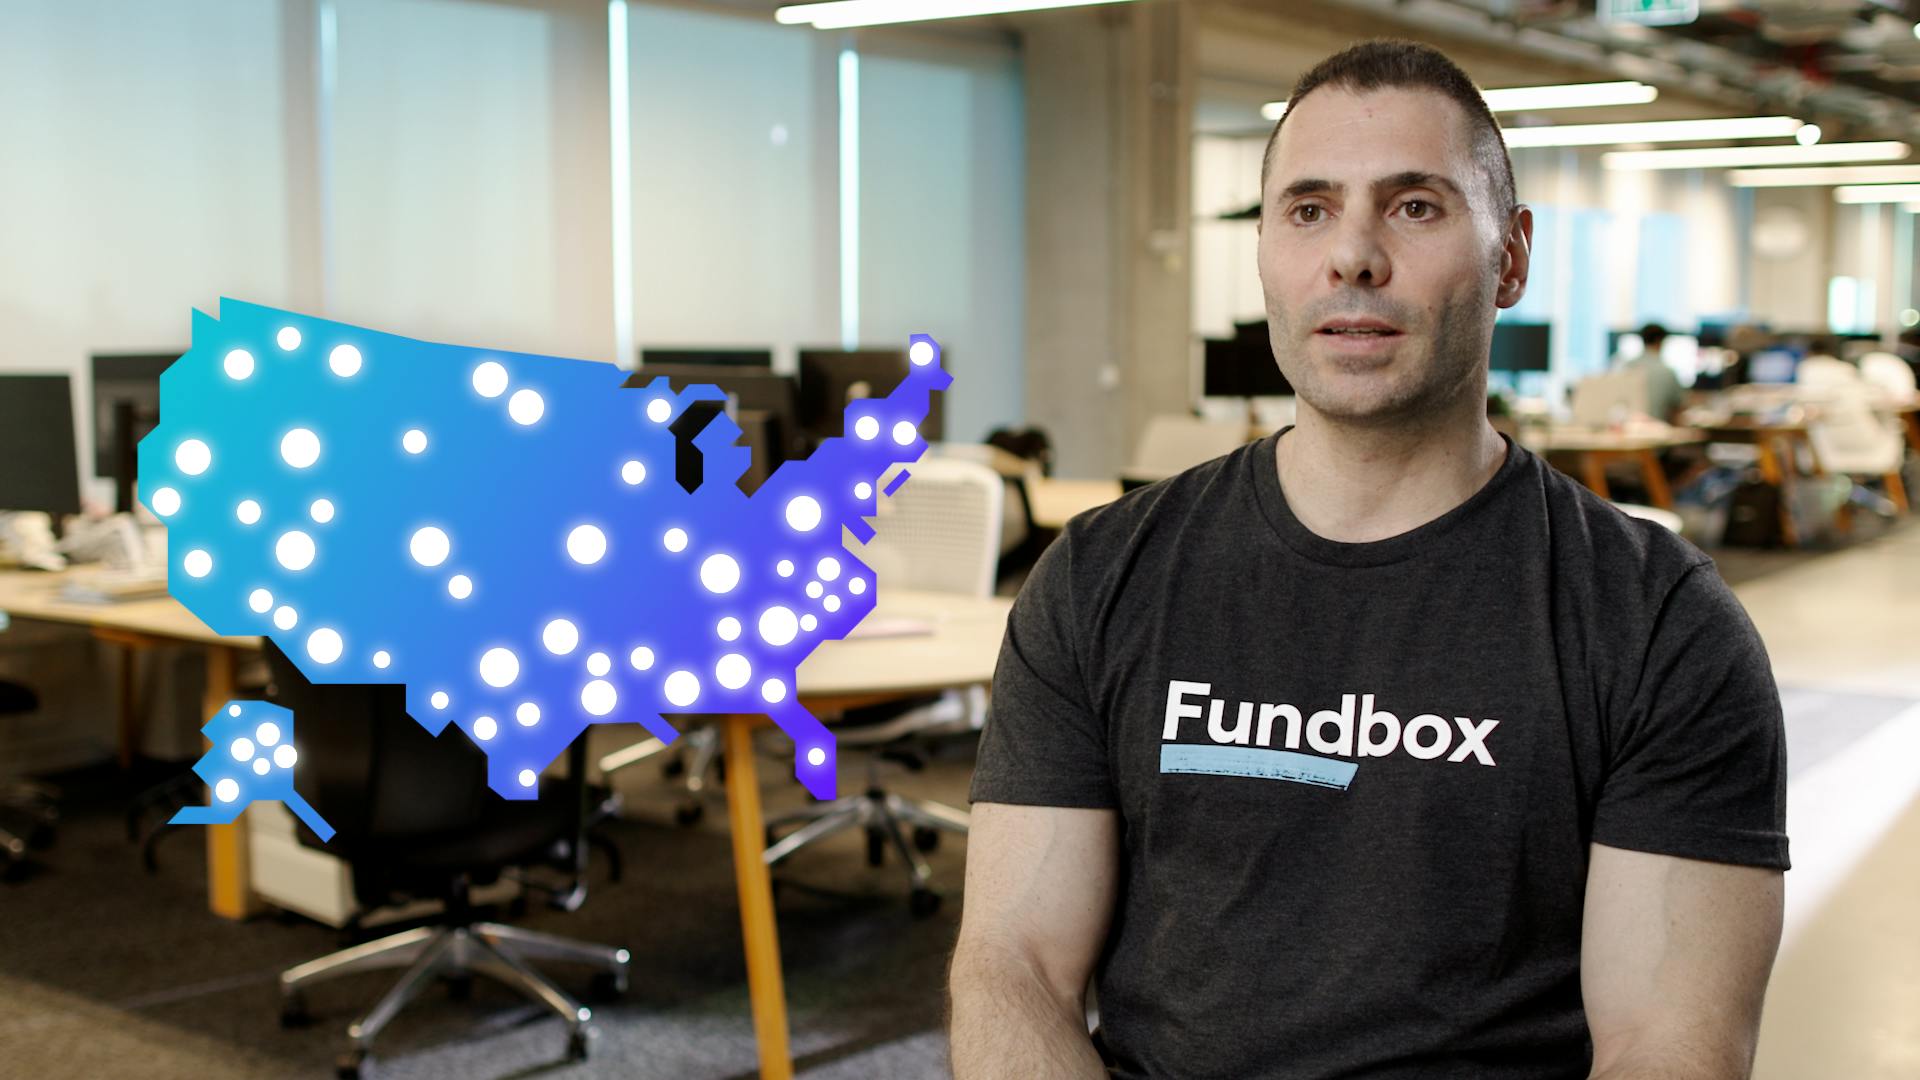 Thumbnail taken from the Fundbox testimonial video; a headshot of a Fundbox employee in a company tee seated in an open office space.